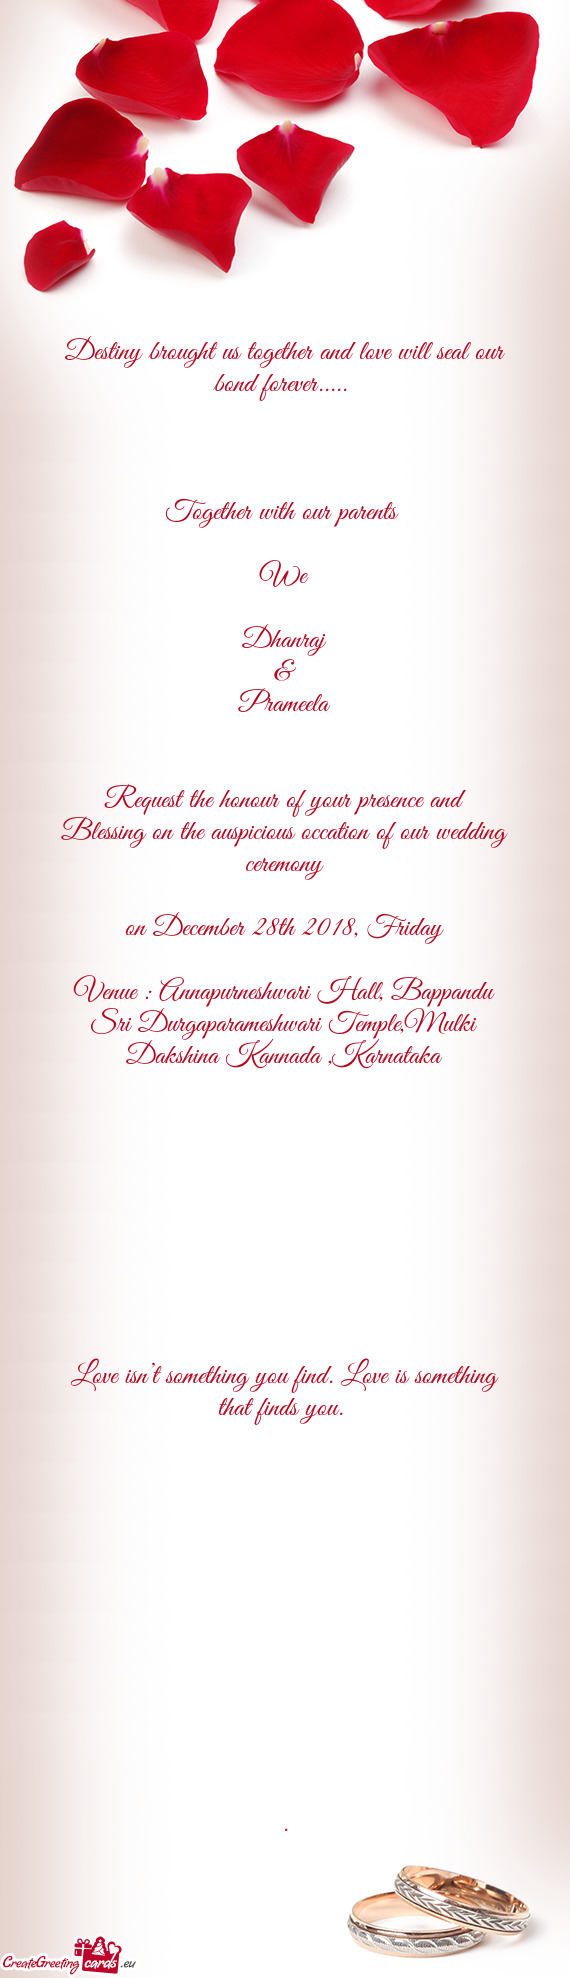 Request the honour of your presence and Blessing on the auspicious occation of our wedding ceremony